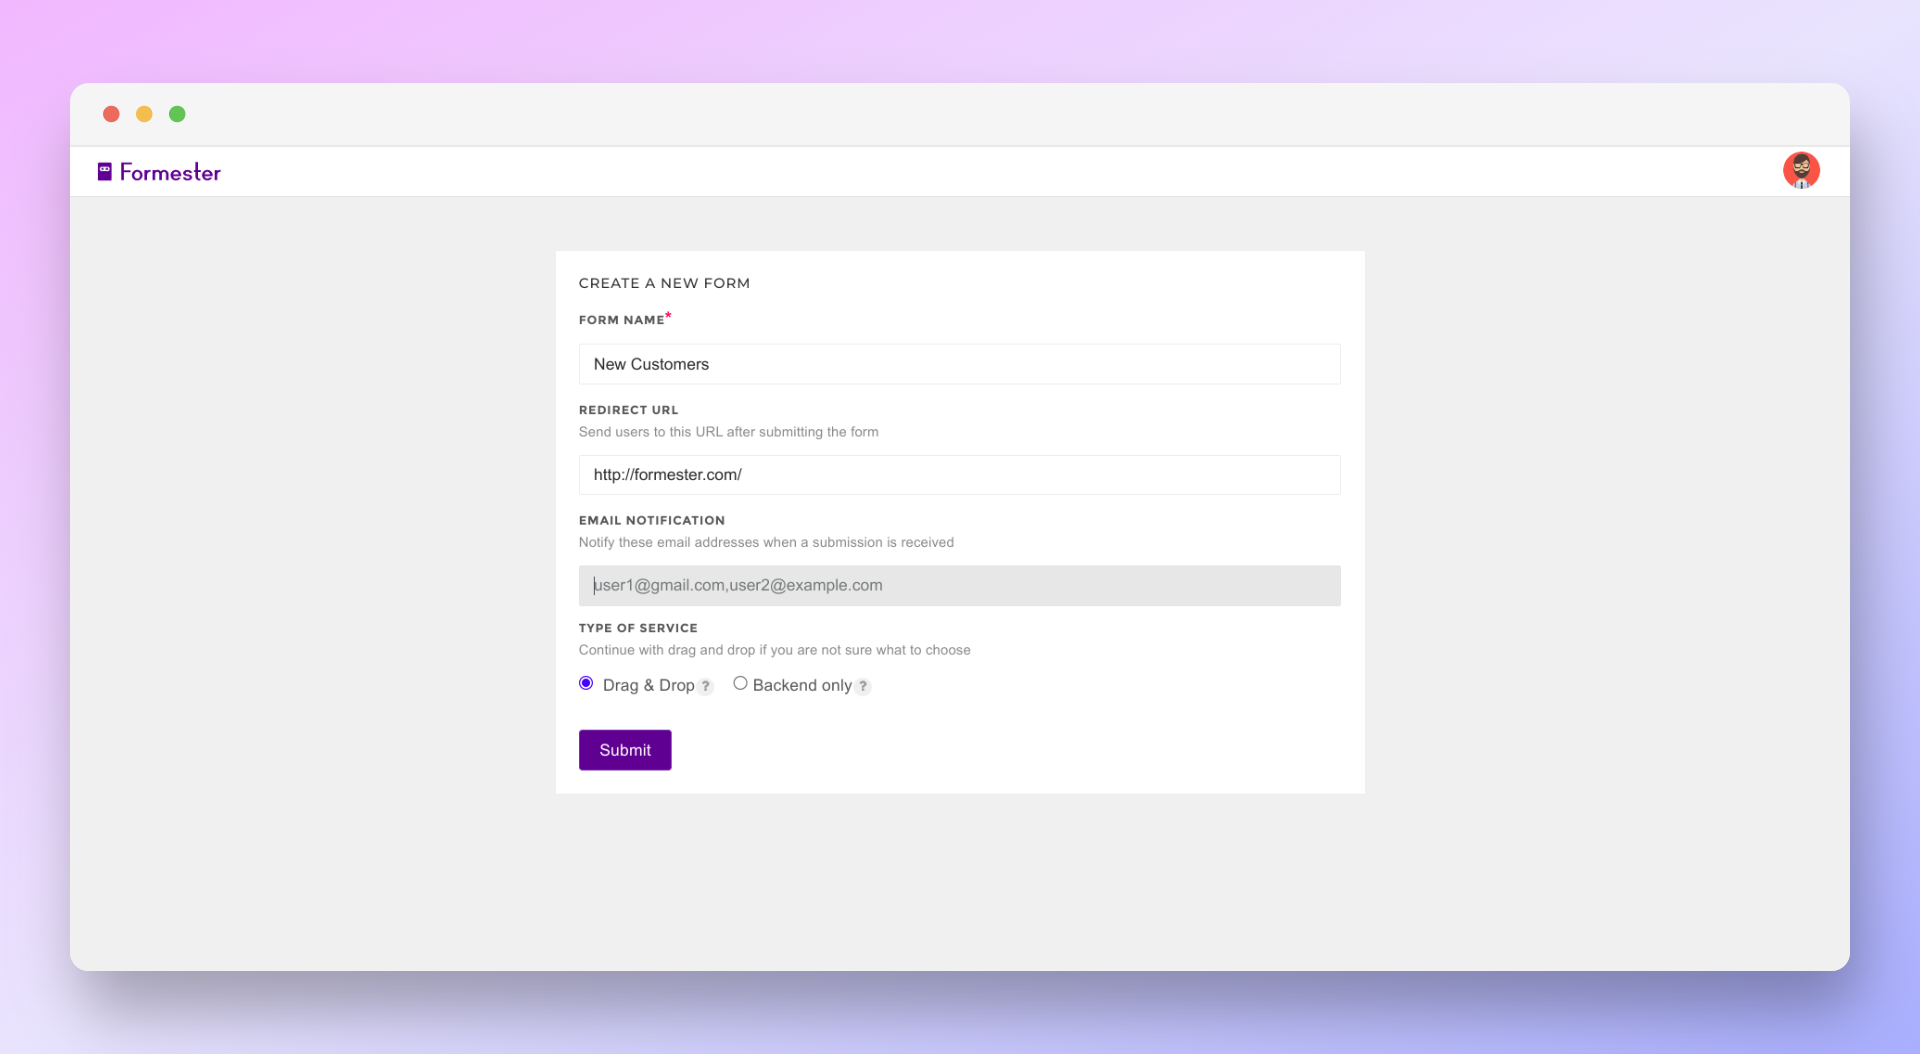 Form accepting details like form name, redirect url and type of service for creating new form